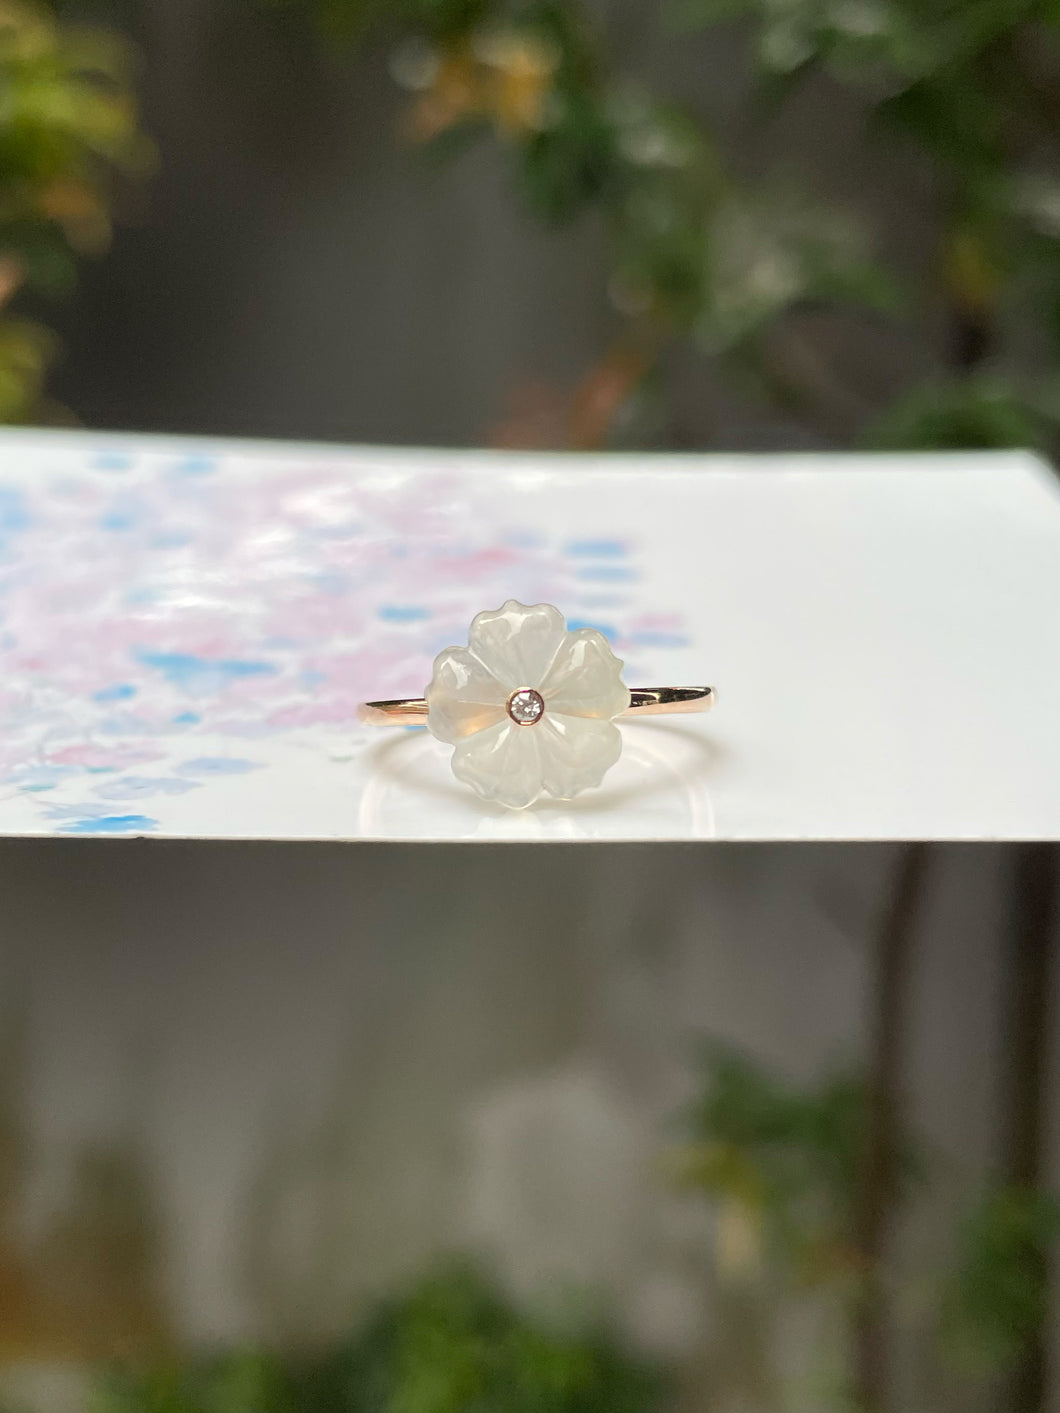 Icy White Carved Jade Ring - Plum Blossom (NJR162)